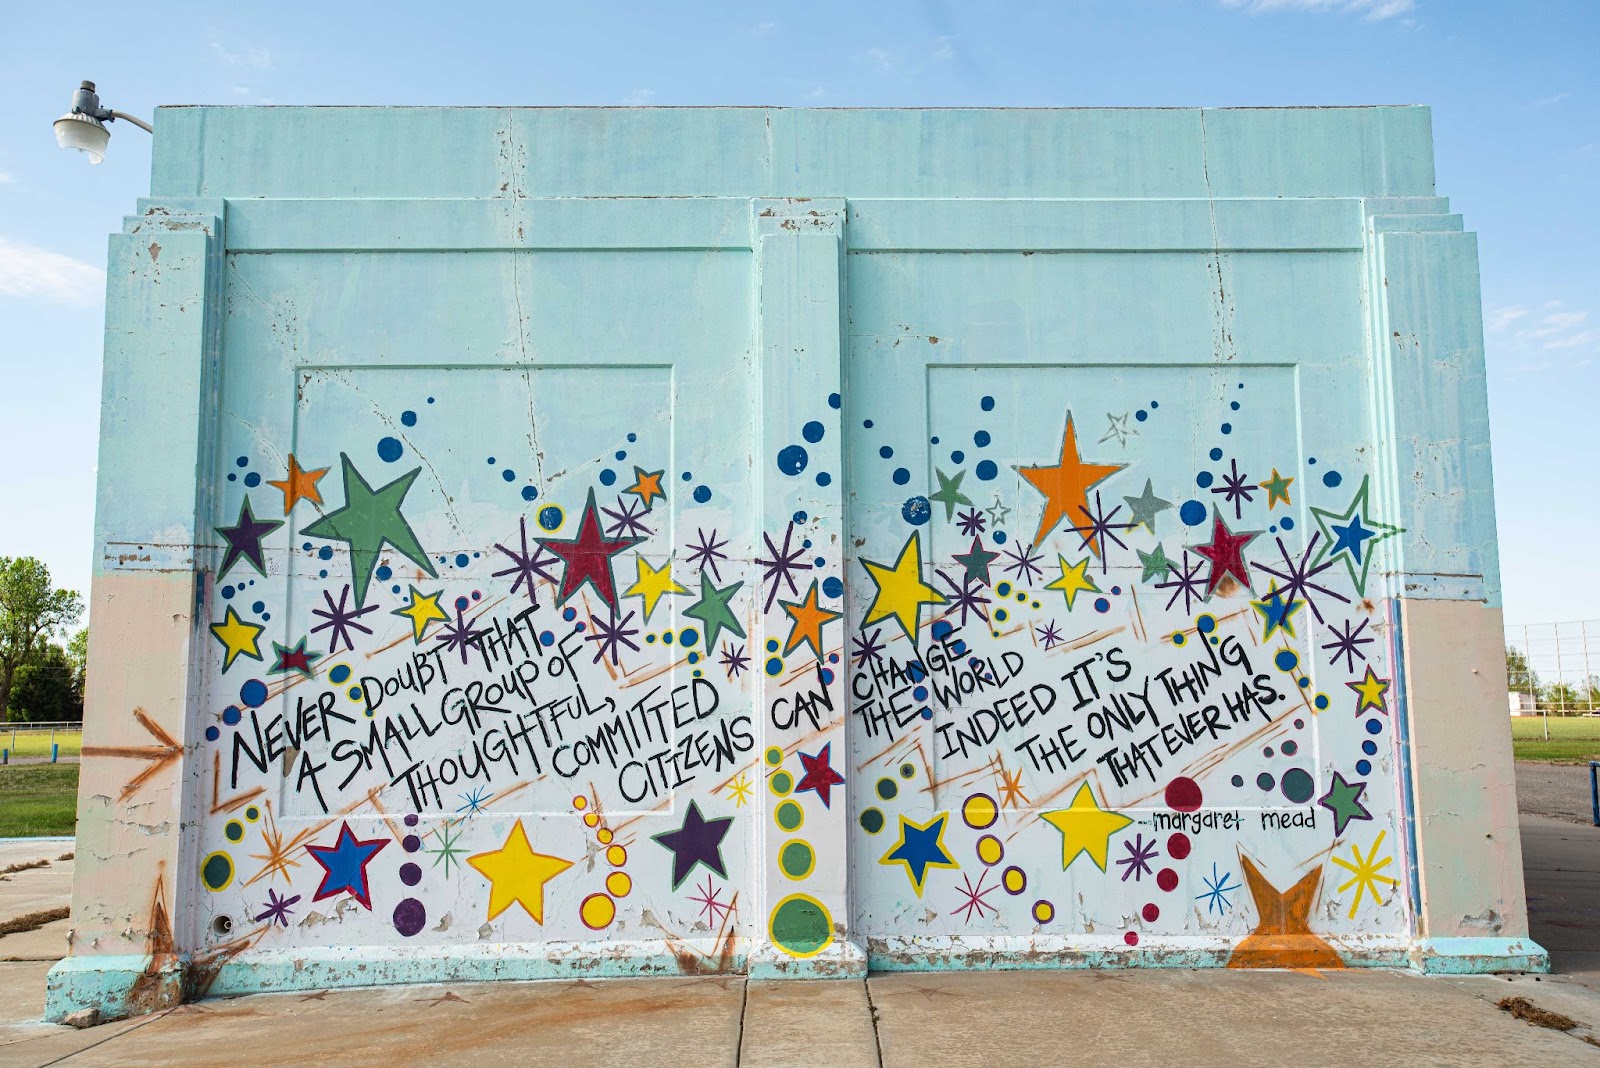 Photo of a mural with colorful stars and text. The text reads, "Never doubt that a small group of thoughtful, committed citizens can change the world indeed it's the only thing that ever has. margaret mead" 